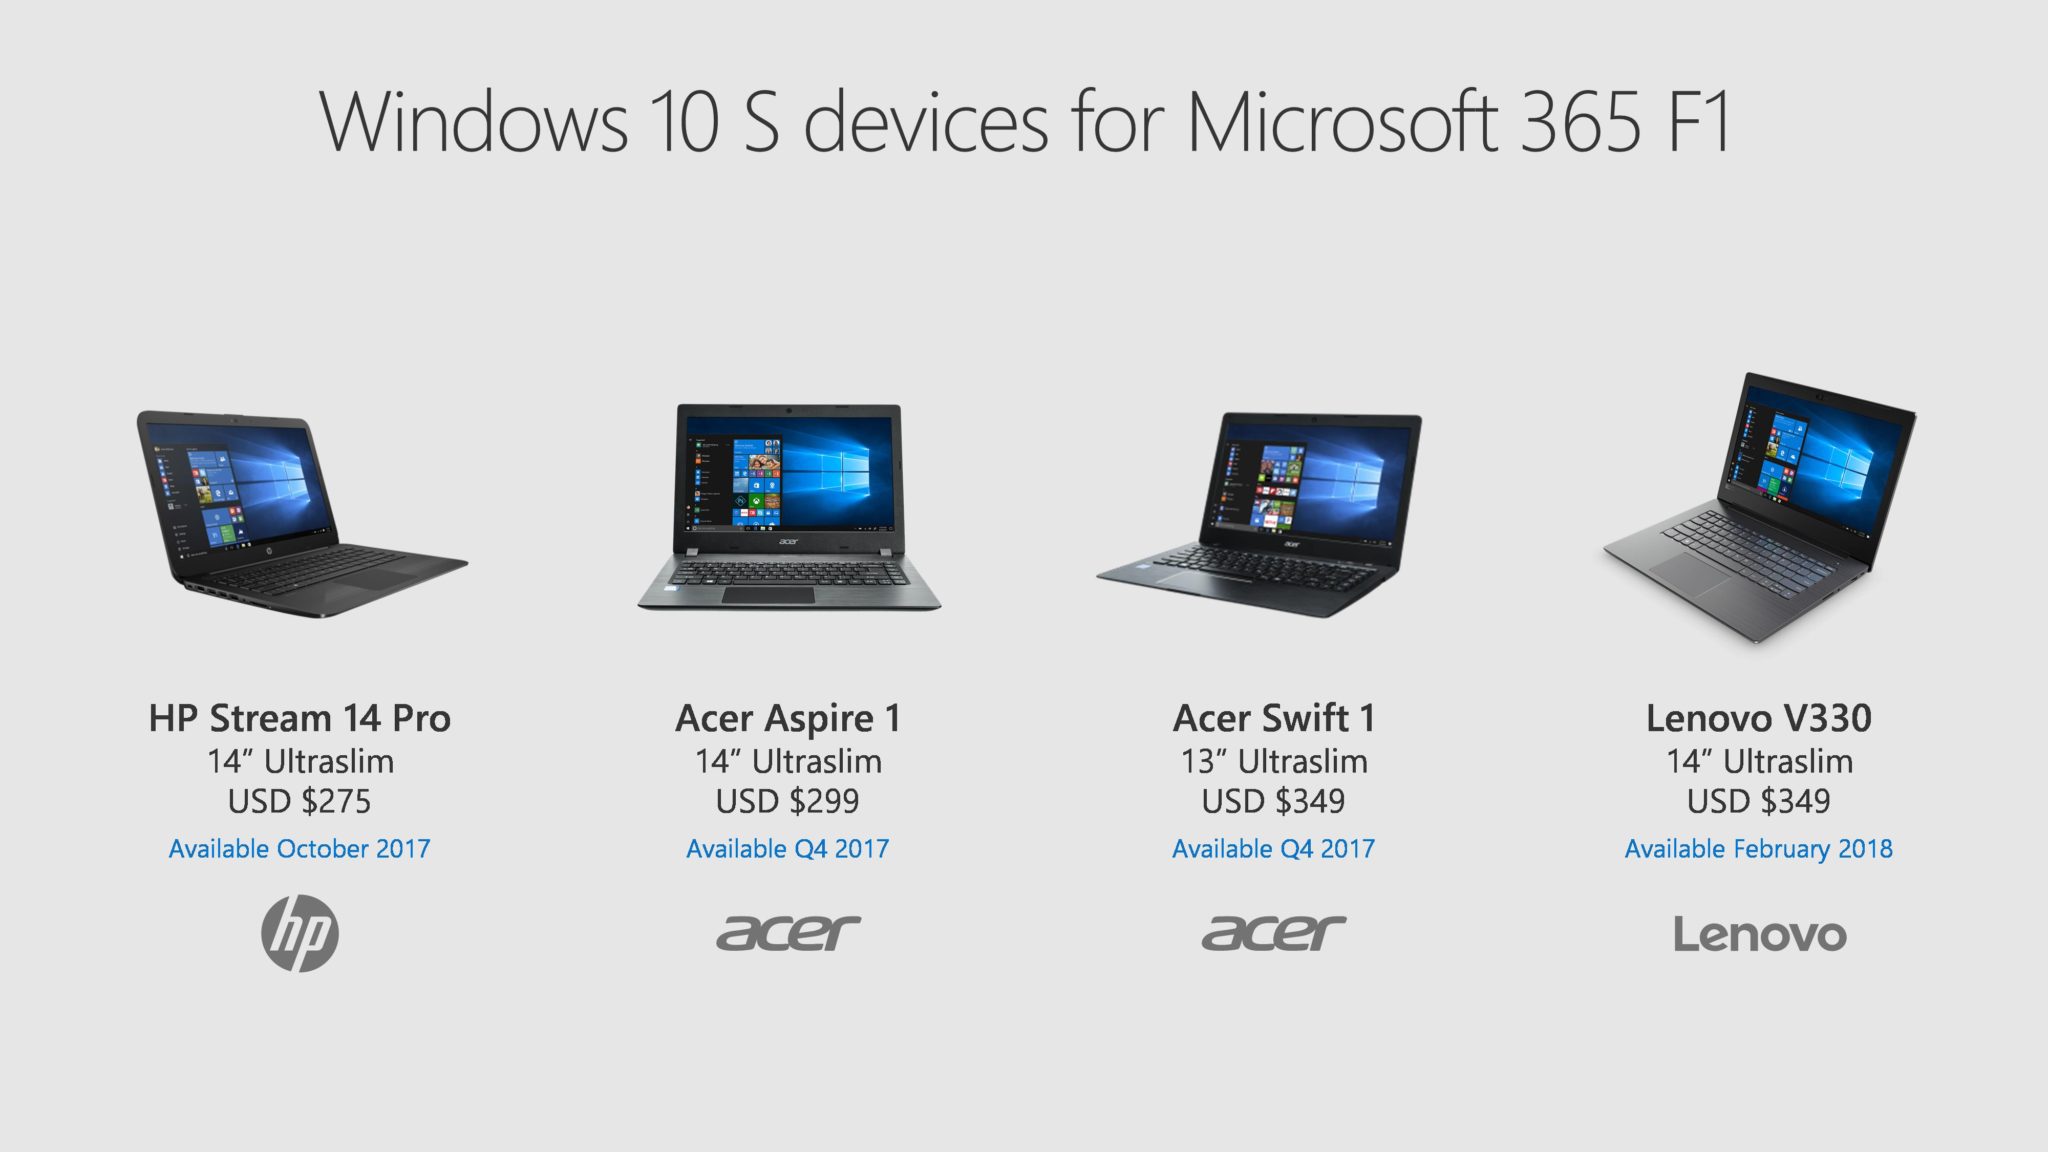 Announcing Windows 10 S devices for Firstline Workers